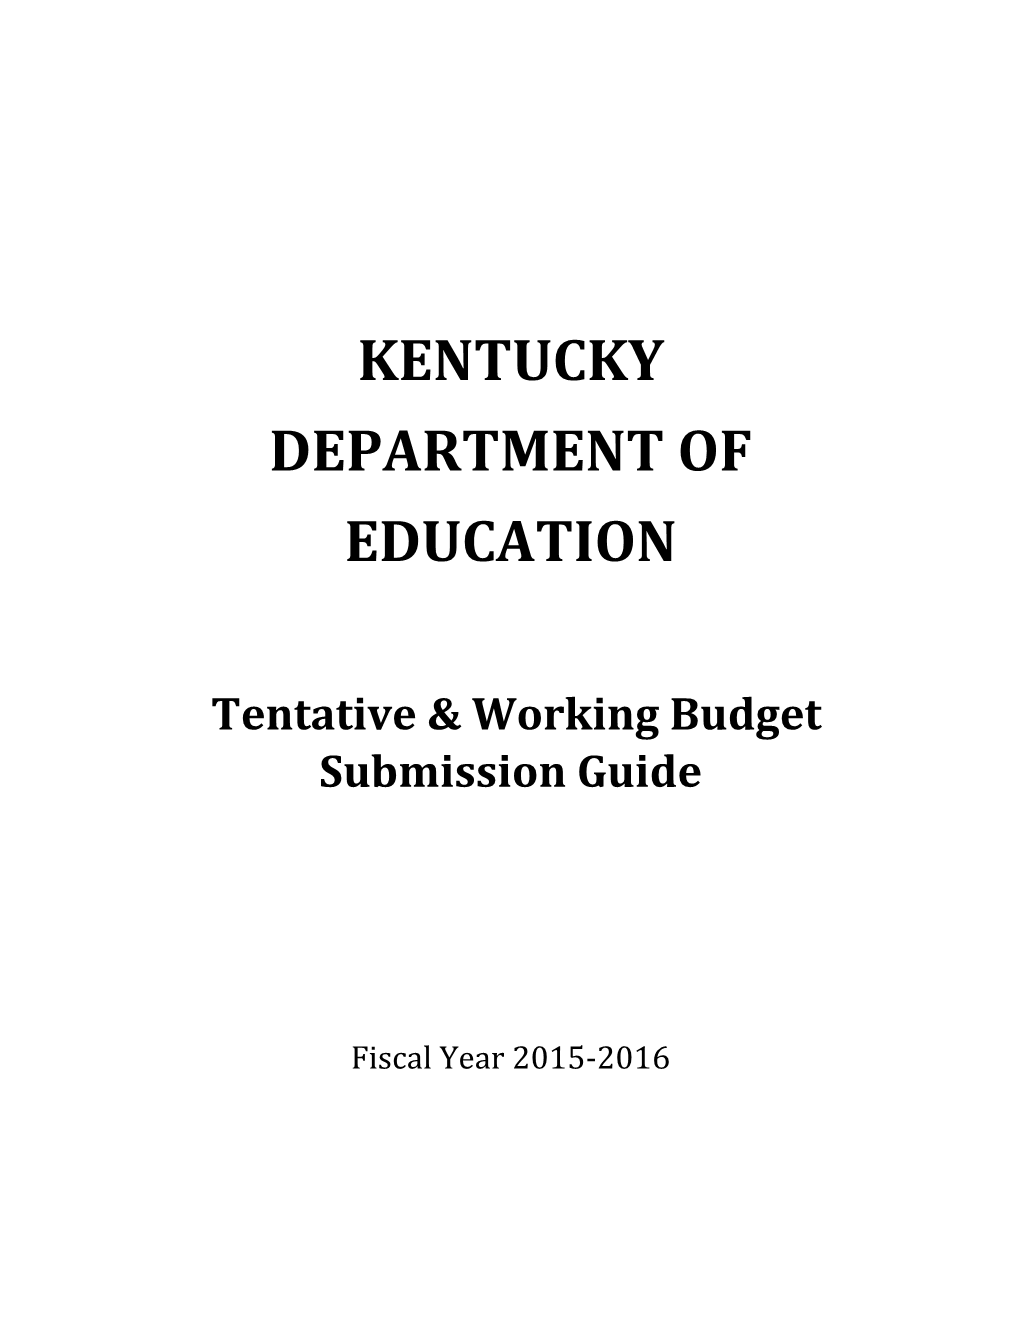 Tentative and Working Budget Submission Guide